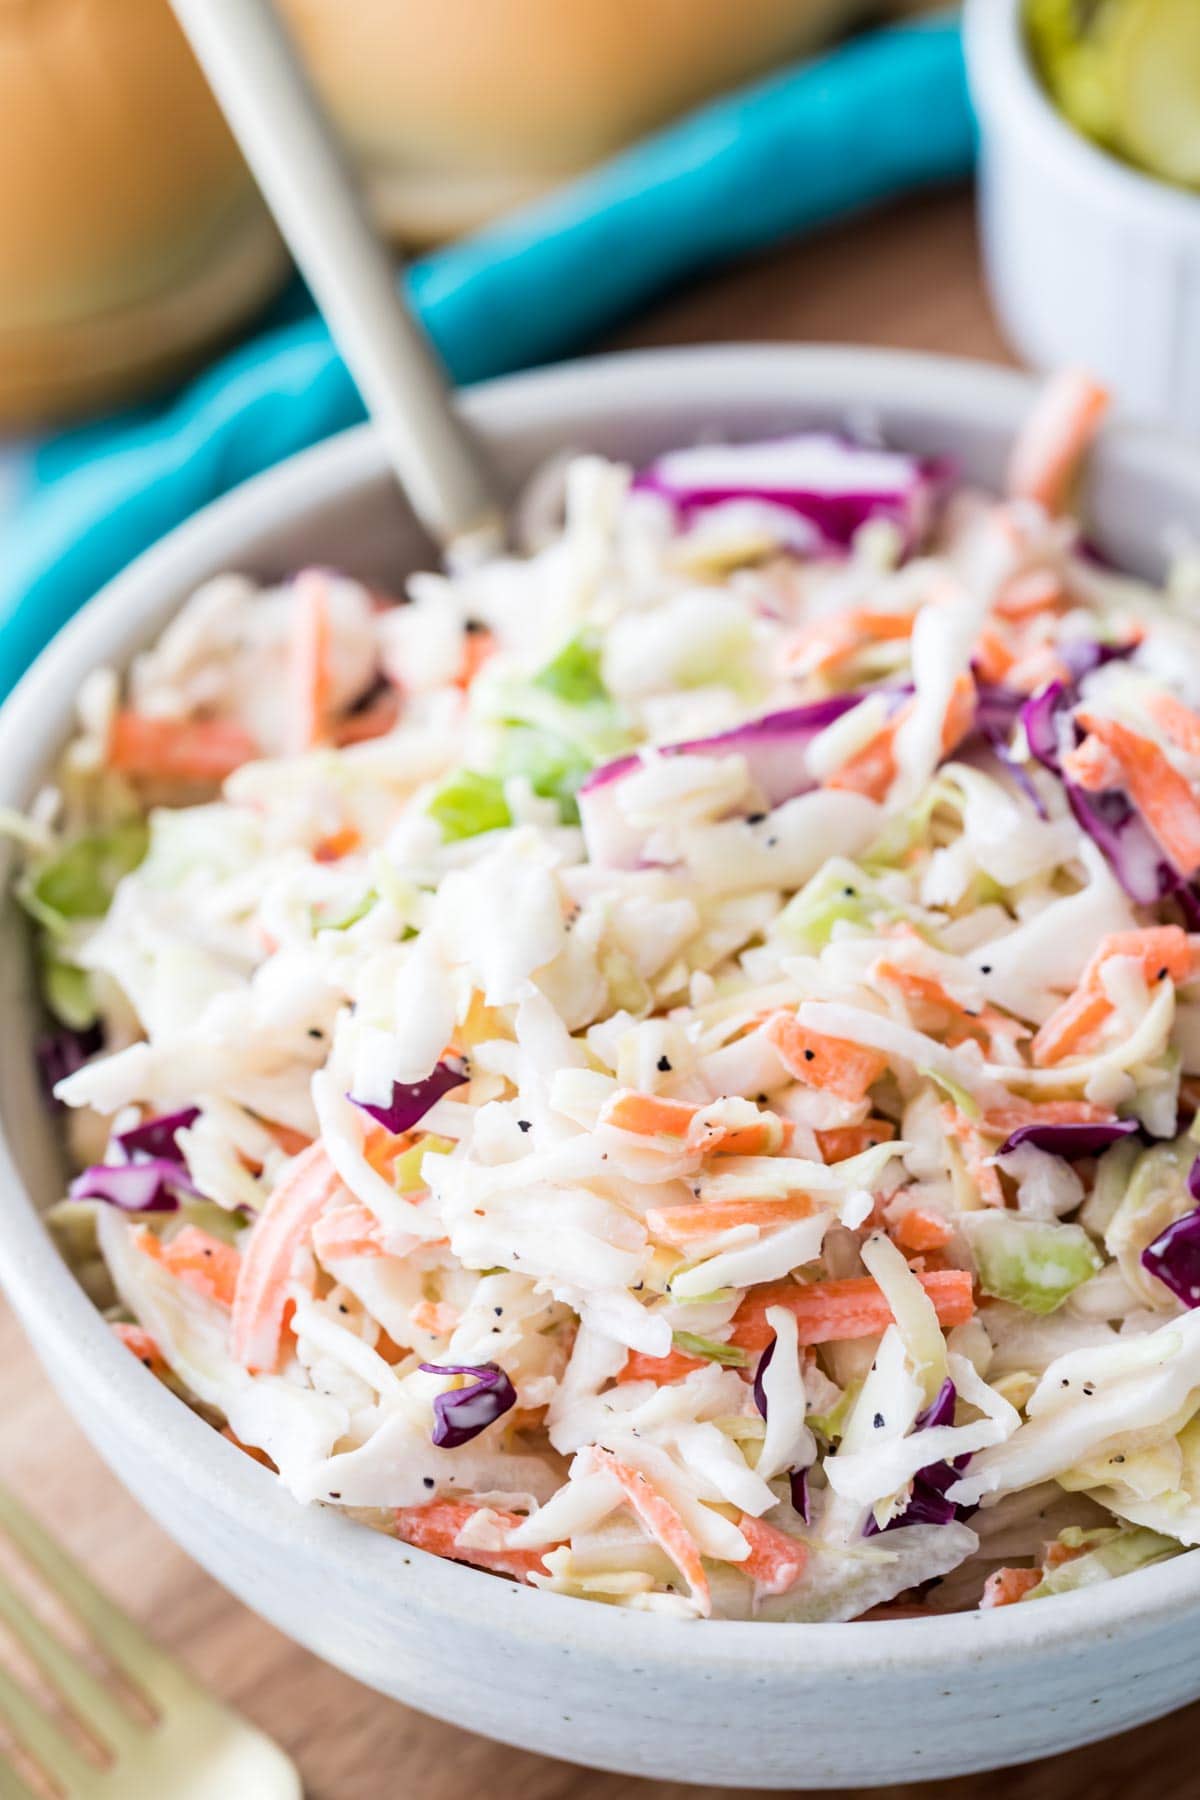 large bowl of homemade coleslaw full of shredded green and purple cabbage, carrots, and creamy dressing co